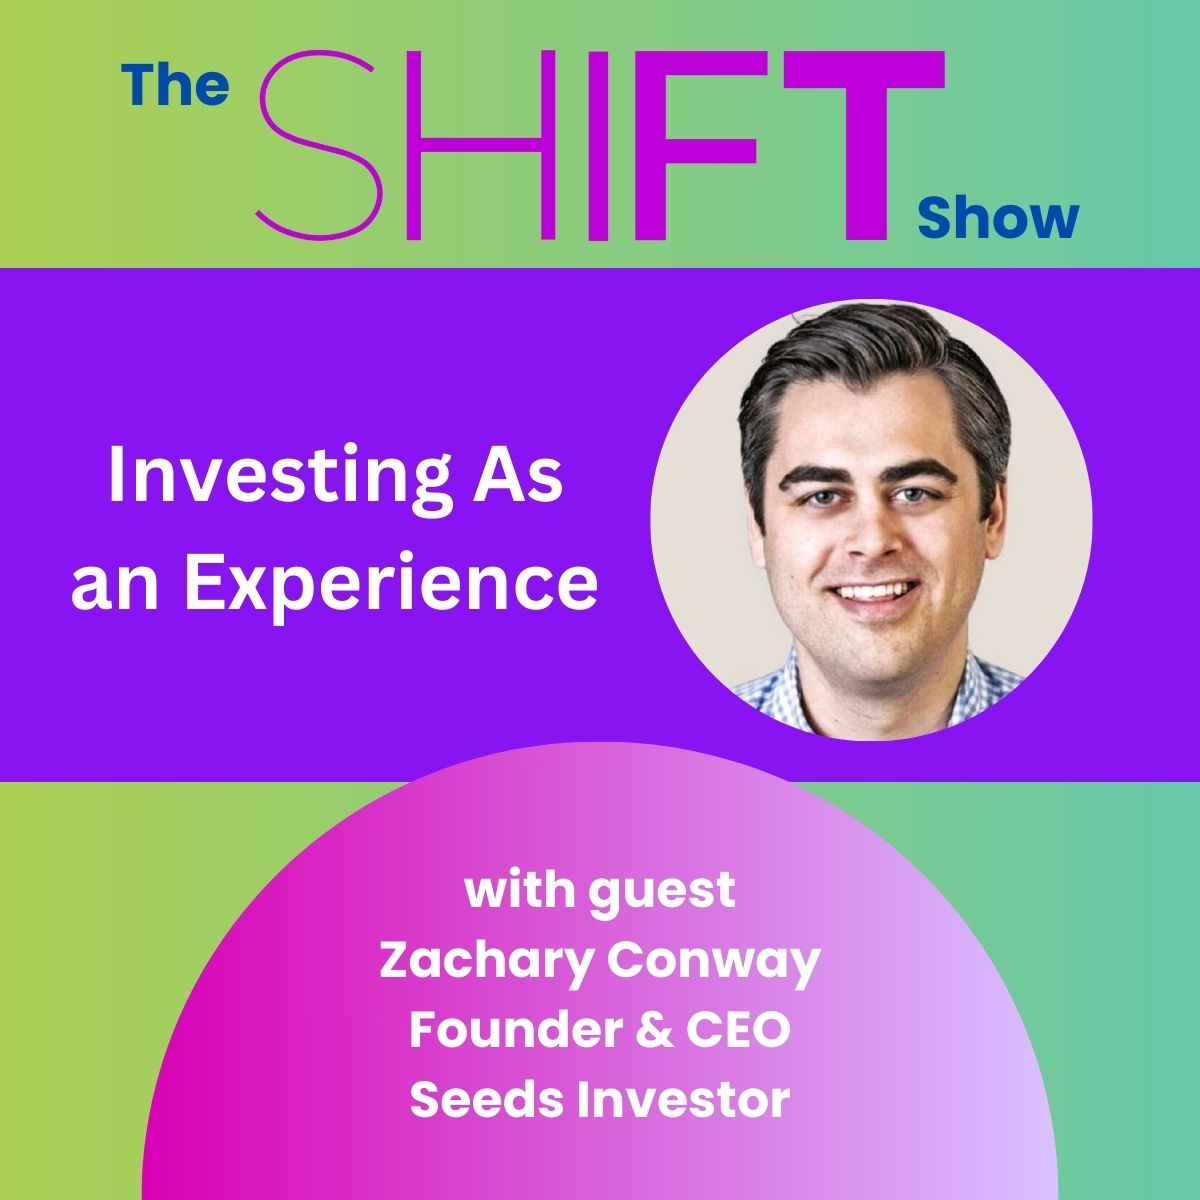 The latest episode of the SHIFT show has dropped! Join @Ross__Marino and @ZachConwaySeeds to hear more about Seeds Investor, and how financial advisors can provide intentional, purposeful, and personalized investing to clients. Listen now-link in the comments!